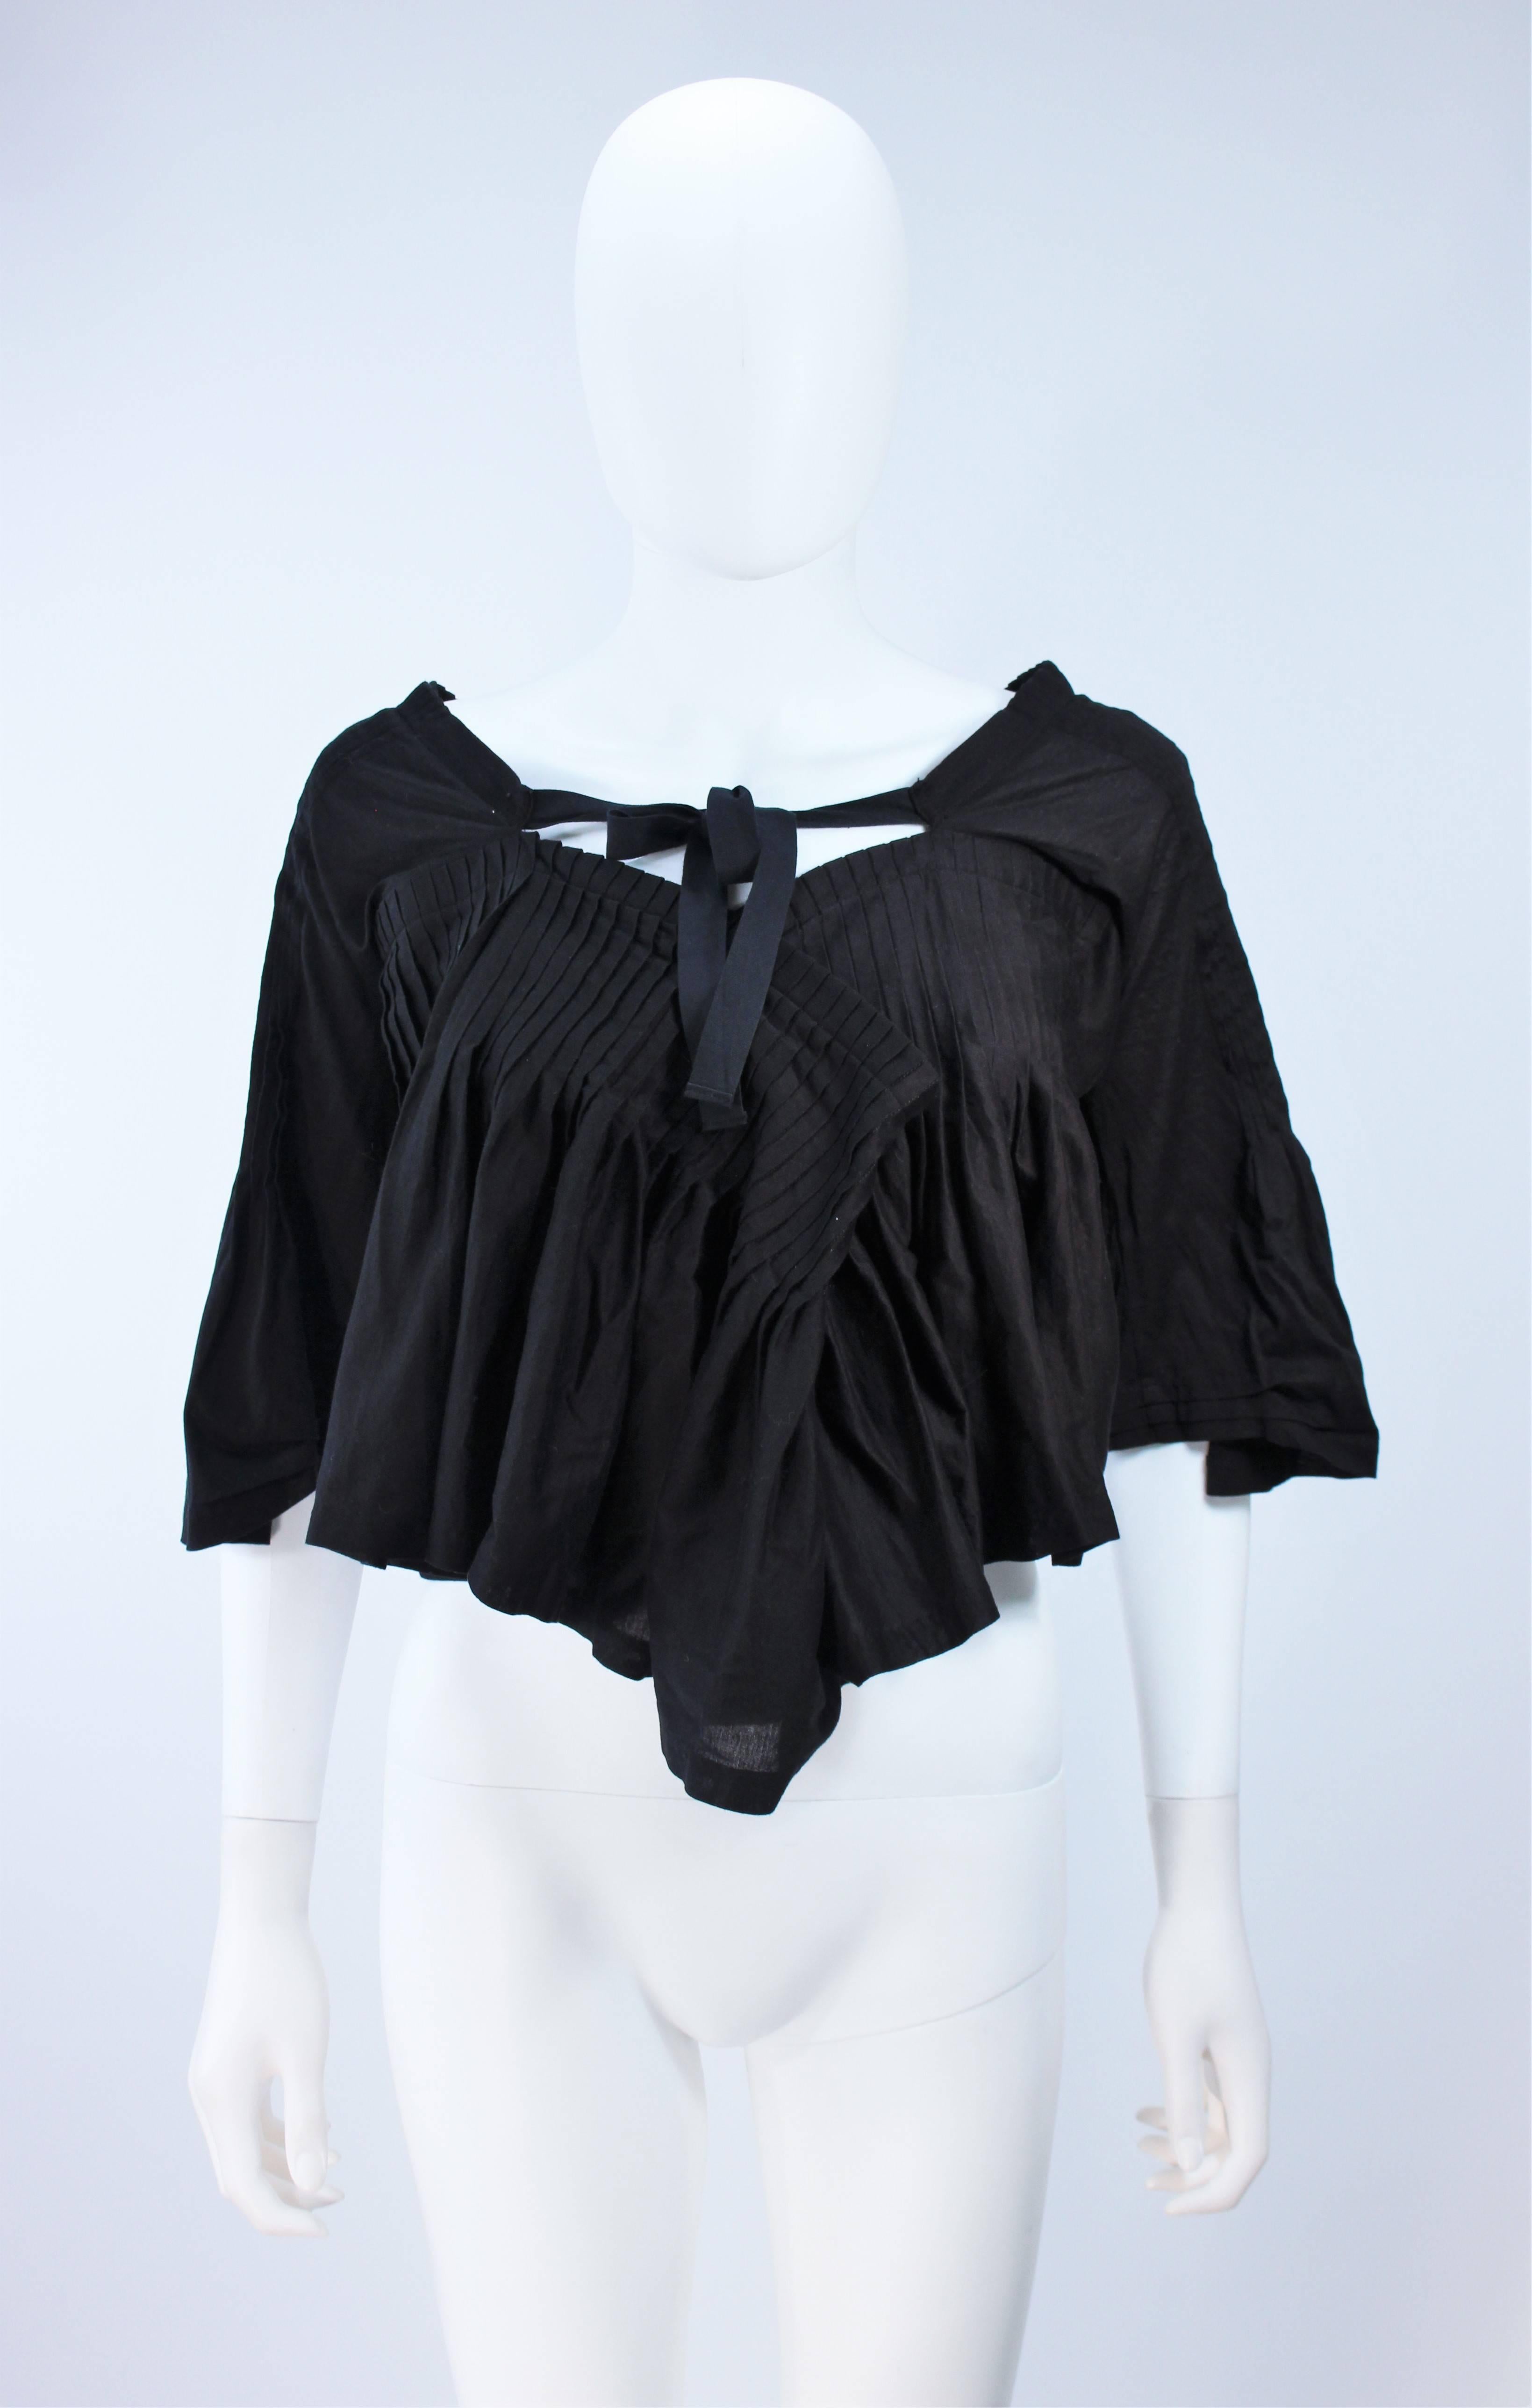  This Comme Des Garçons top is composed of a black pleated cotton with button detail at the center front and tie. In like new condition. 

  **Please cross-reference measurements for personal accuracy. 

Measures (Approximately)
Length: